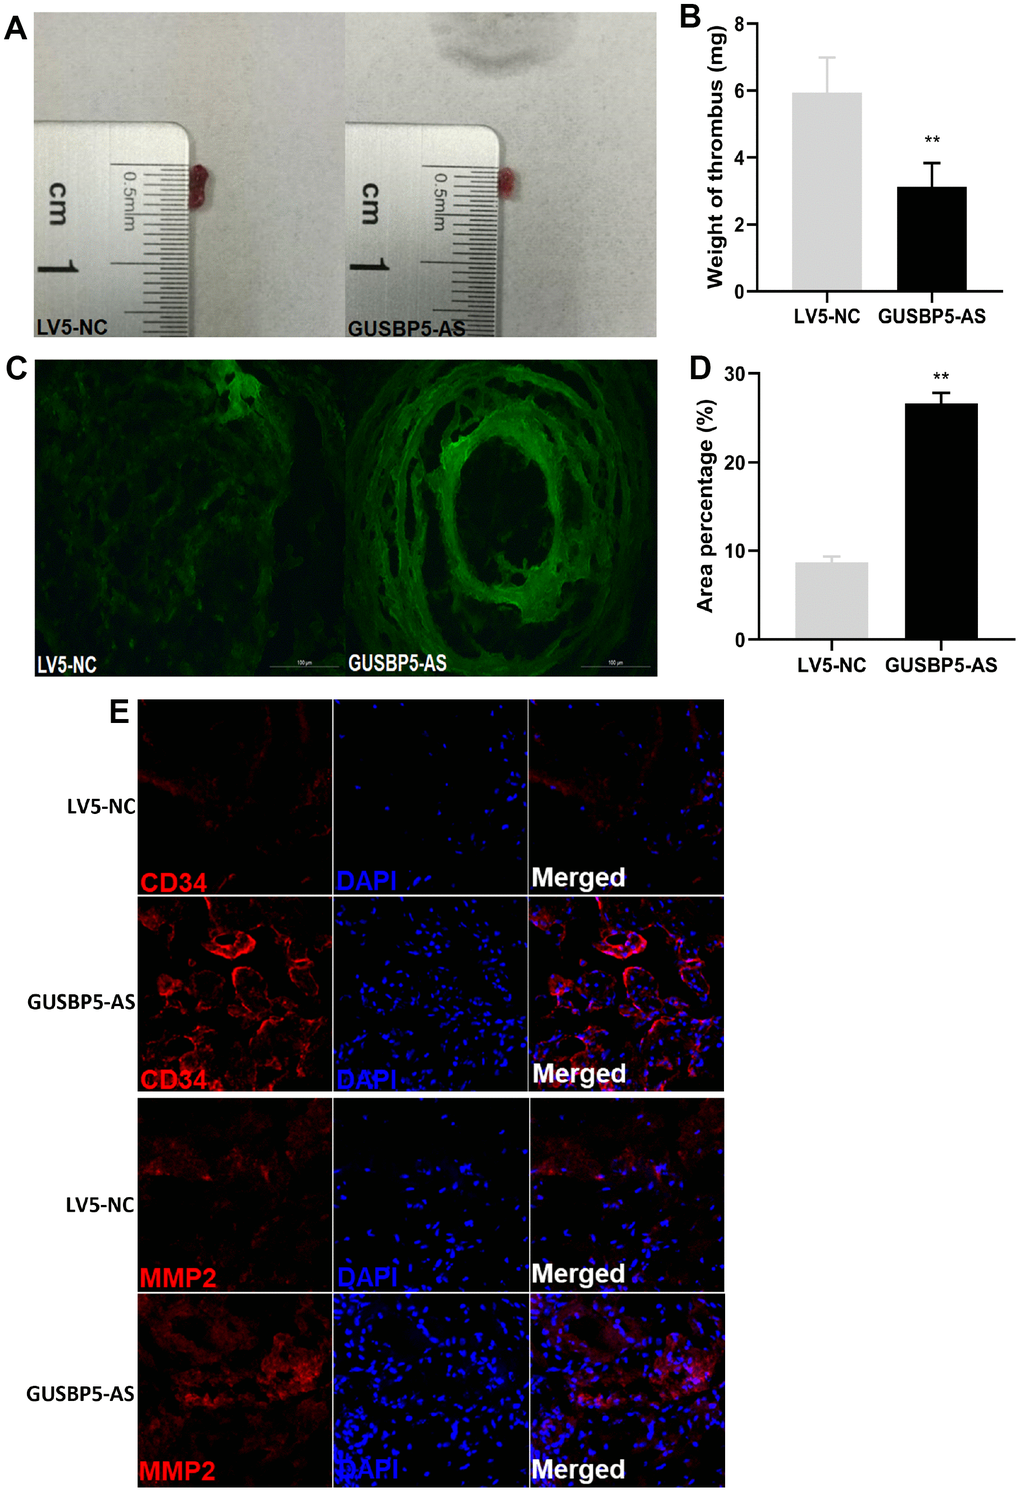 Effects of lncRNA GUSBP5-AS on the treatment of DVT. (A) Representative images of the thrombosis in GFP-GUSBP5-AS-EPC group and LV5-NC group were observed. (B) Weight of the venous thrombi at day 7 after the transplantation. Data are expressed as mean ± SEM (n = 8 mice per group), **P C) Representative images of recruitment of GFP-positive EPCs in DVT (×200). (D) Percentage of green fluorescent area in DVT. **P E) The expression levels of CD34 and MMP2 in thrombosis were detected by immunofluorescence.